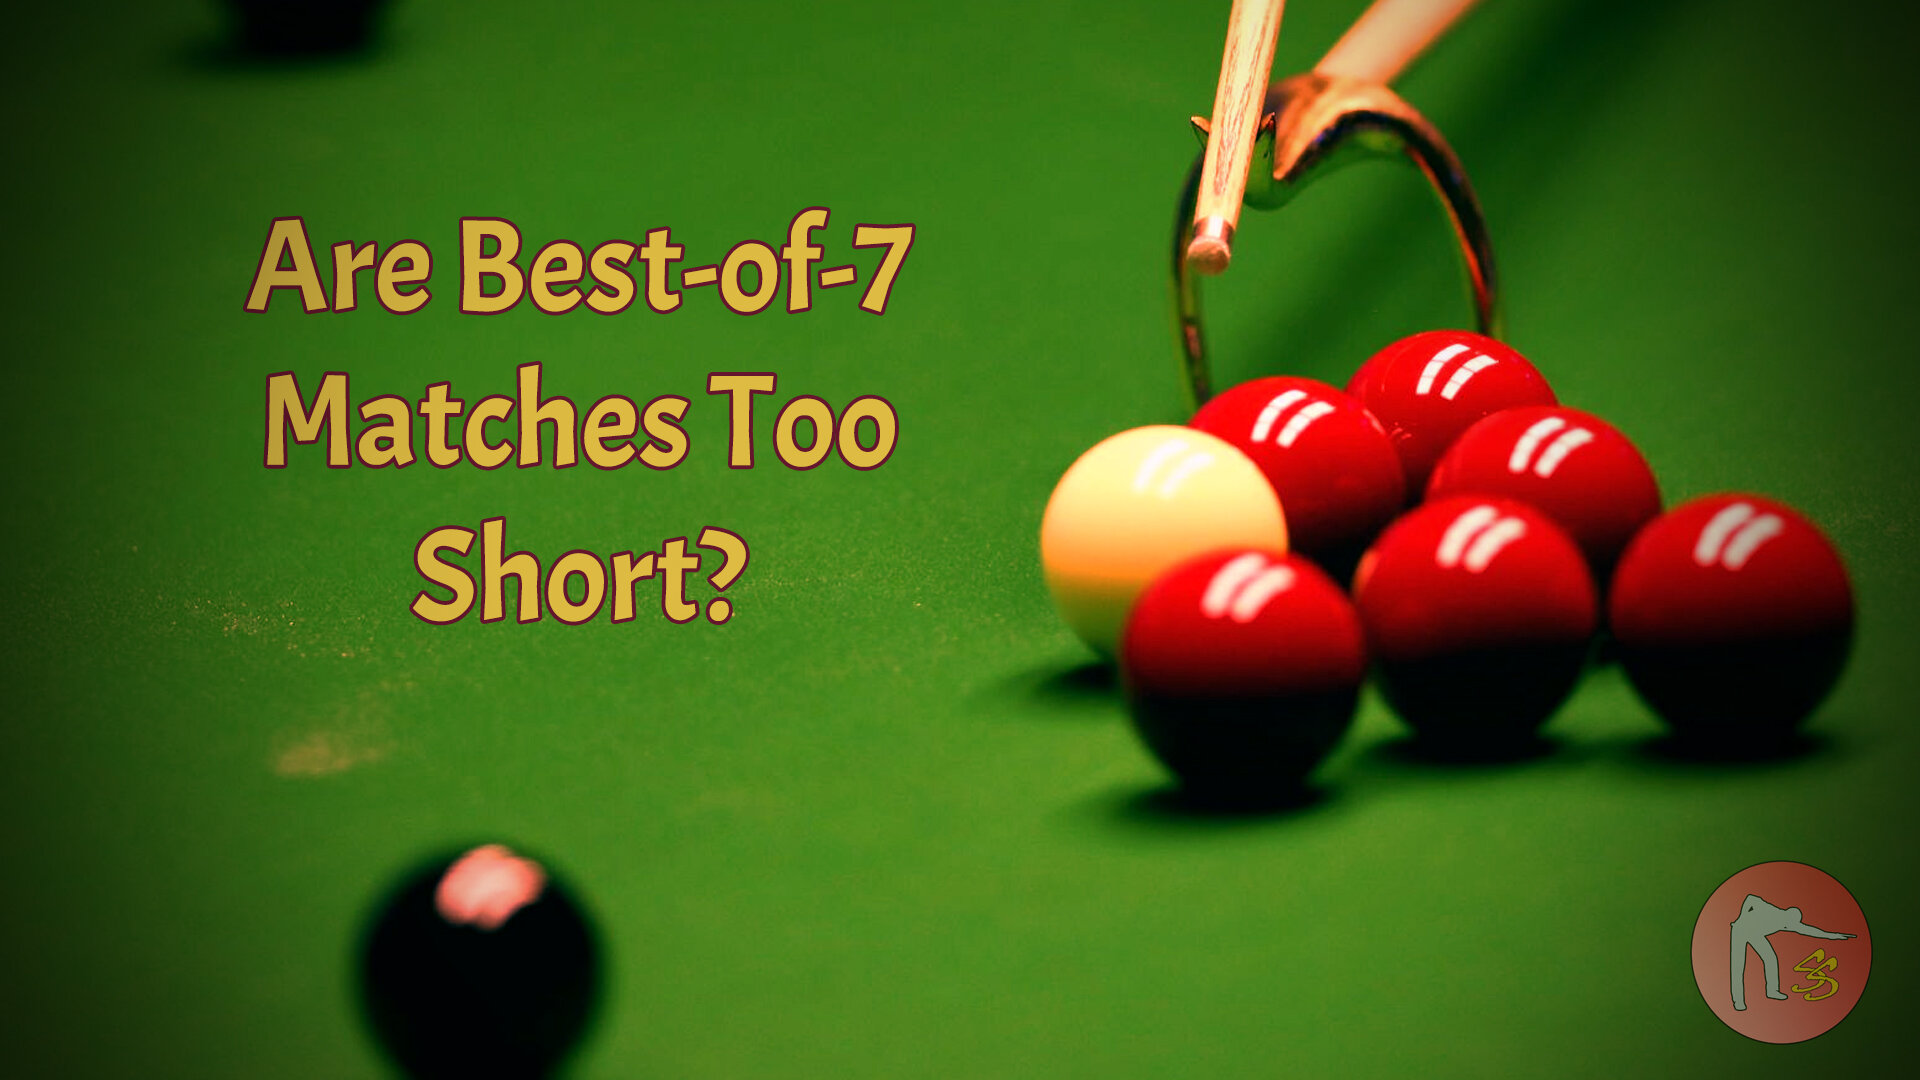 Are Best-Of-7 Matches Too Short? — Snooker Shorts